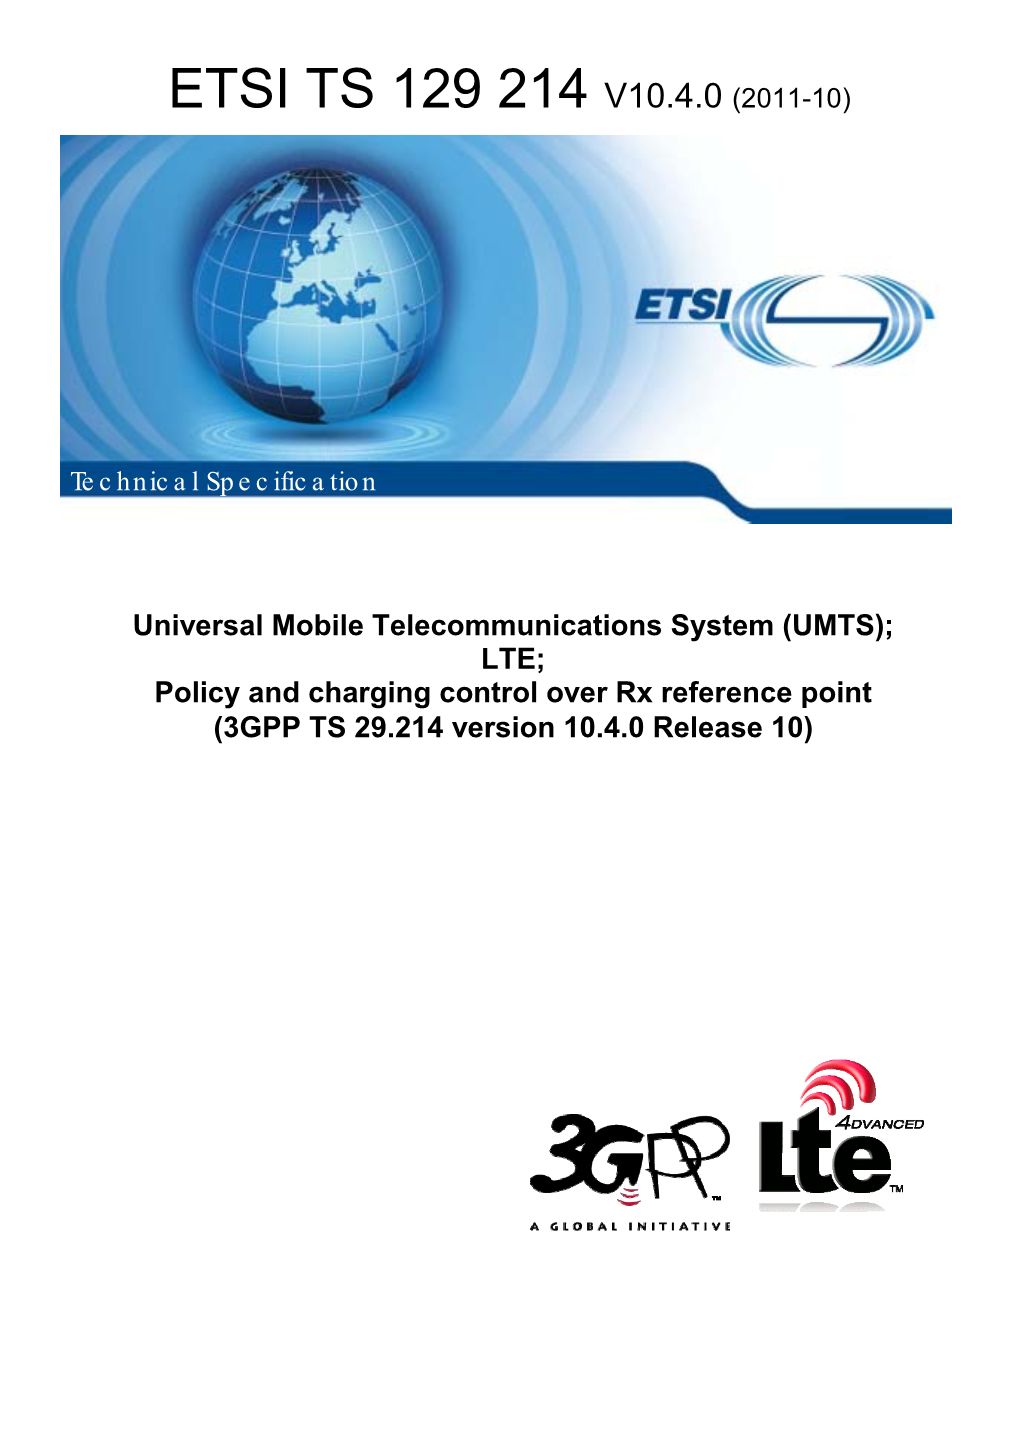 LTE; Policy and Charging Control Over Rx Reference Point (3GPP TS 29.214 Version 10.4.0 Release 10)